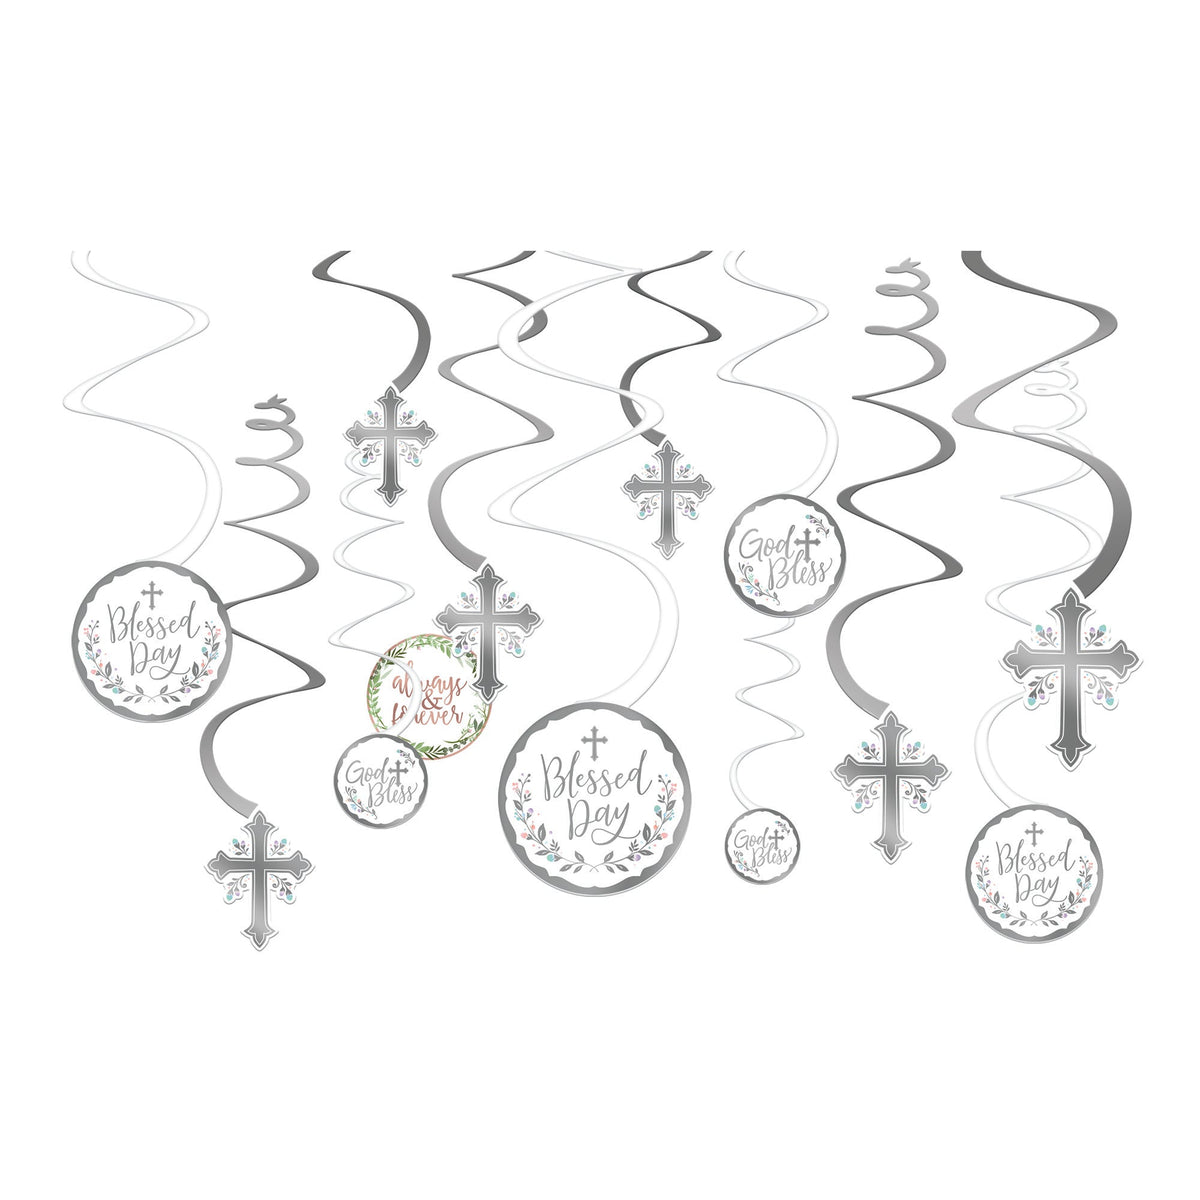 Holy Day Spiral Decorations Package of 12